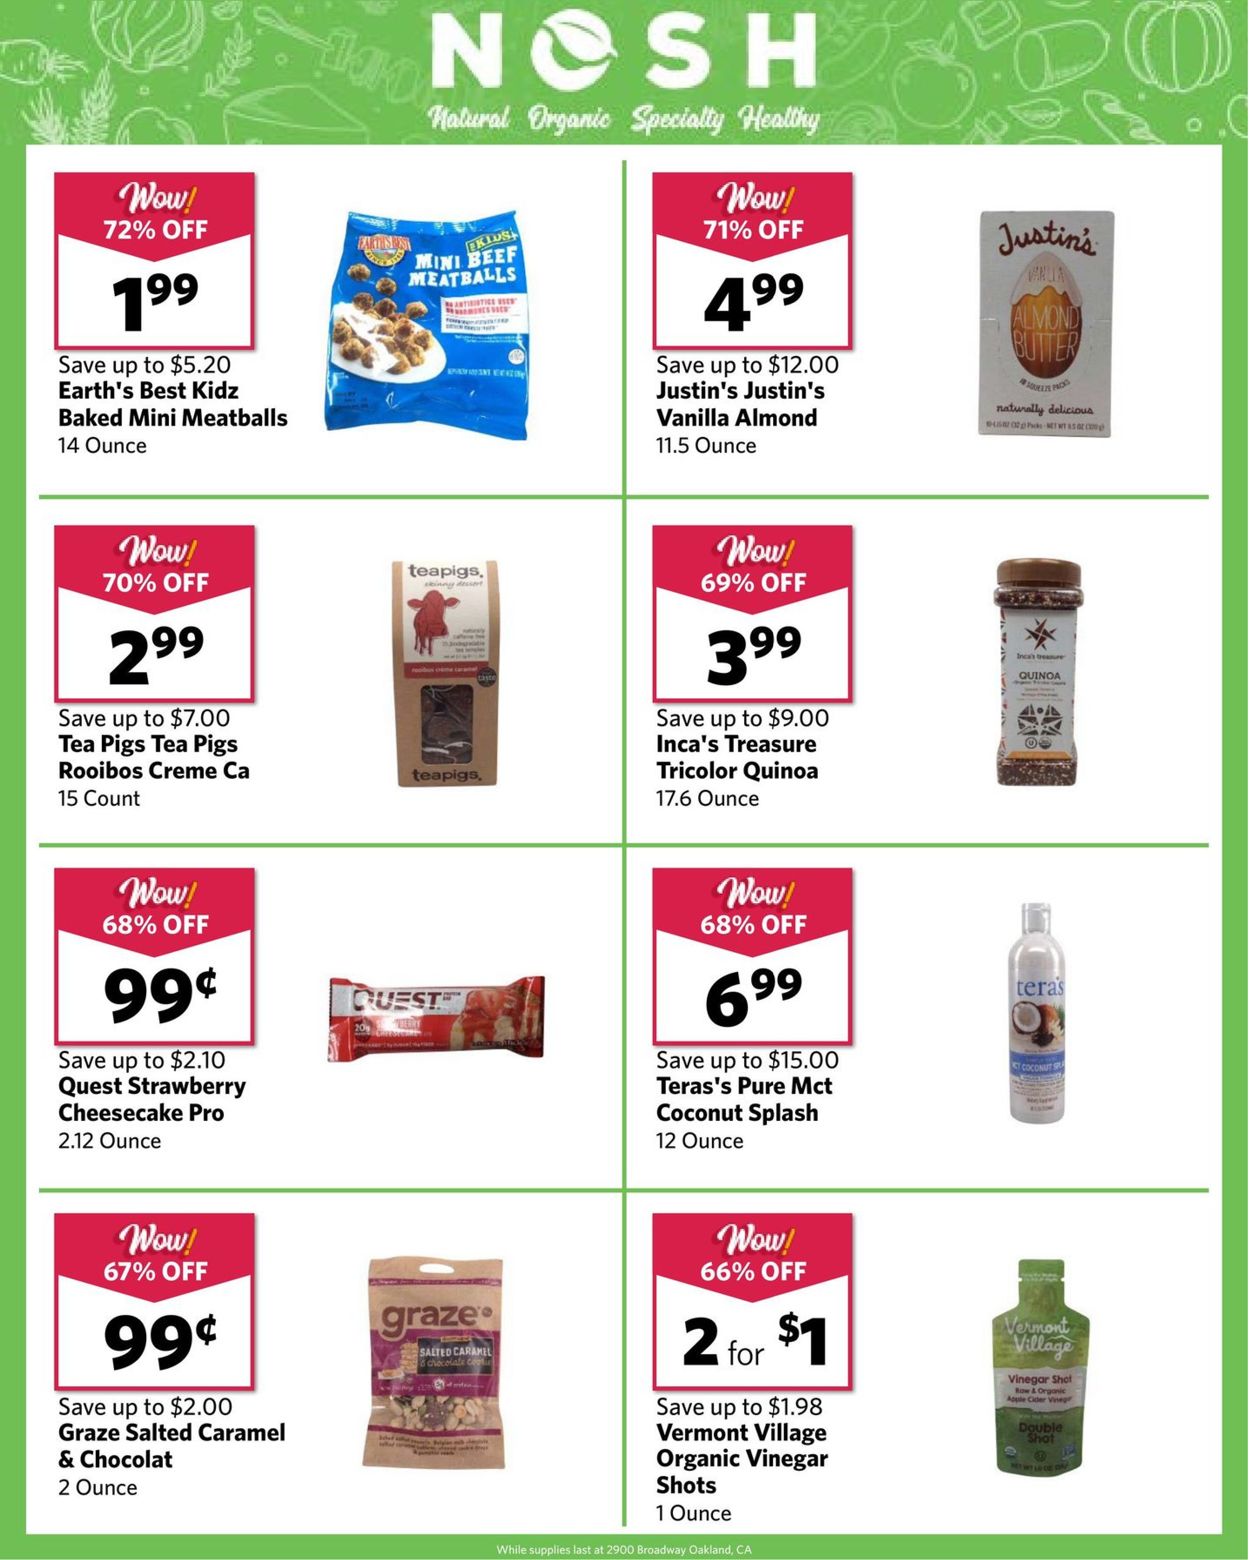 Grocery Outlet Weekly Ad Circular - valid 05/22-05/28/2019 (Page 7)